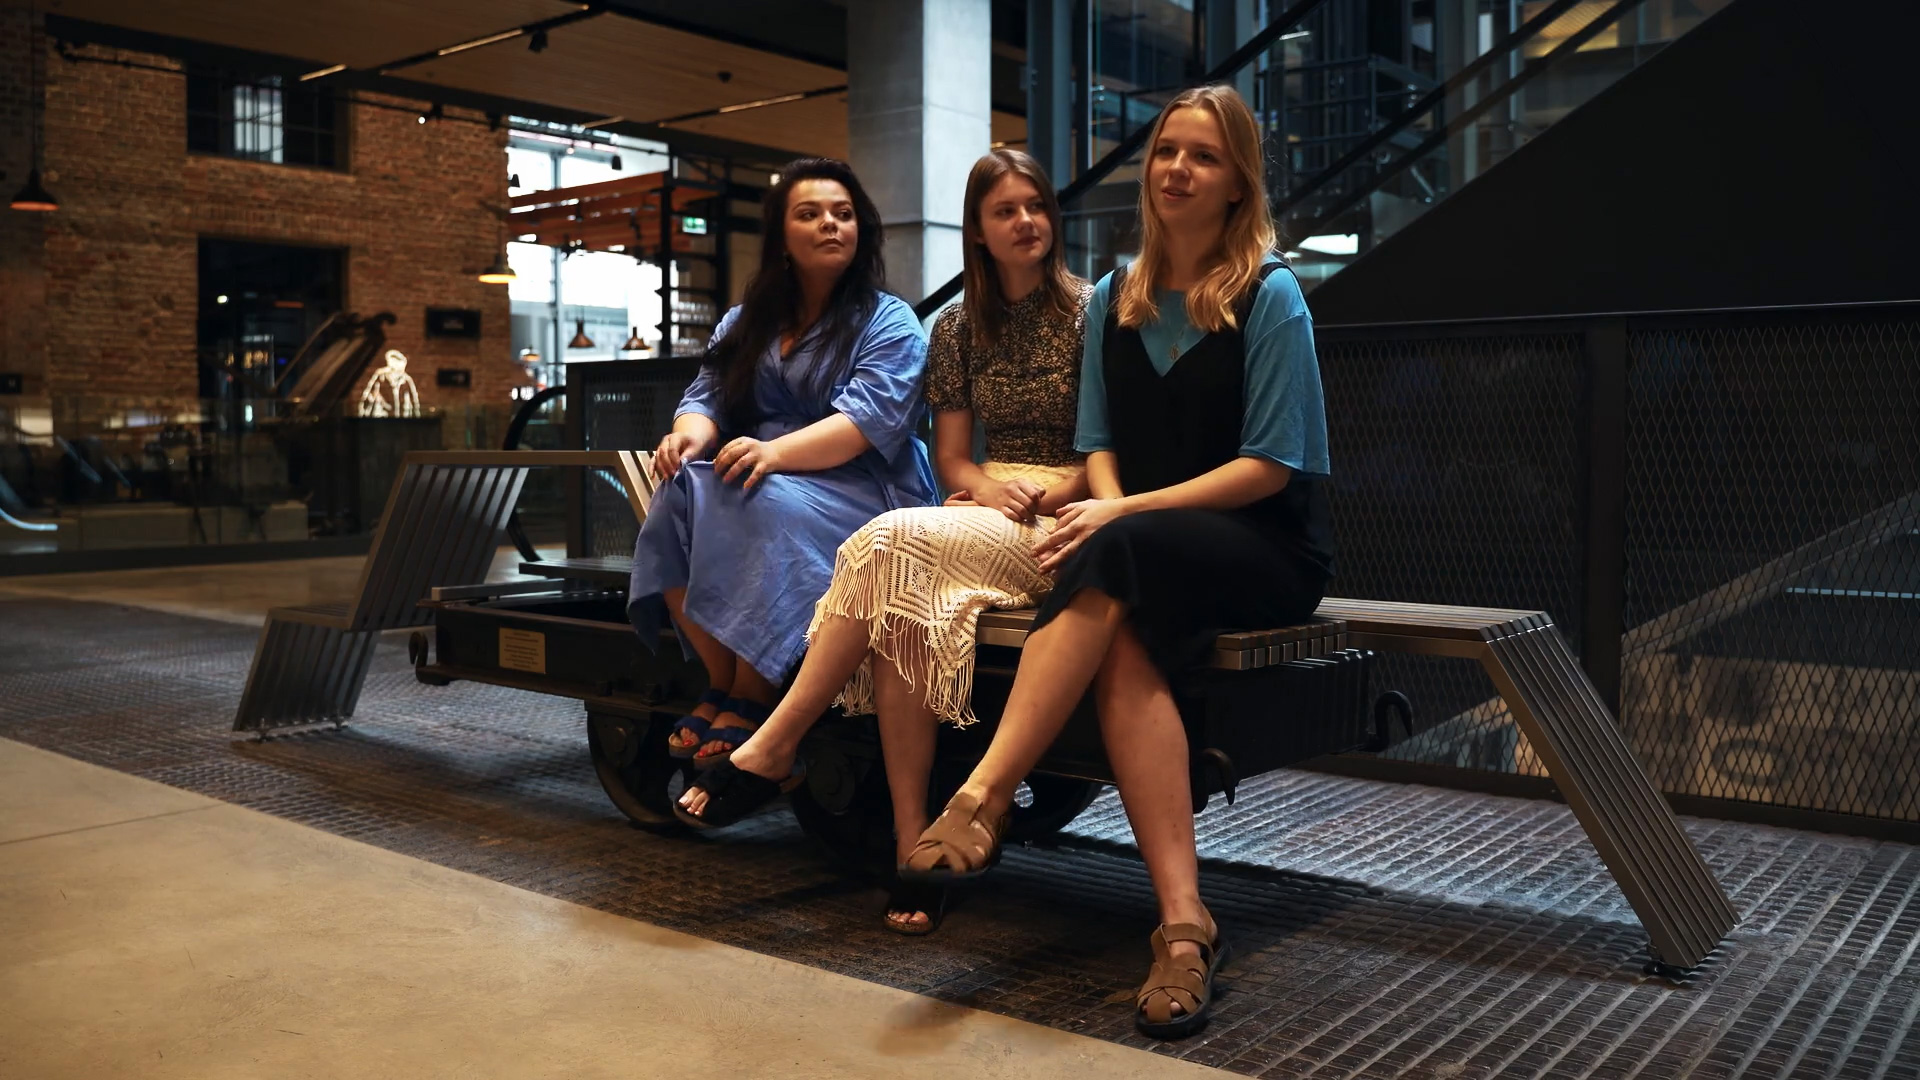 Dobrawa Orłowska, Anna Brzoza and Oliwia Warchałowska, students of the School of Form, on the bench they designed at the Norblin Factory | Screenshot from a video produced by Mediafresh for the Norblin Factory